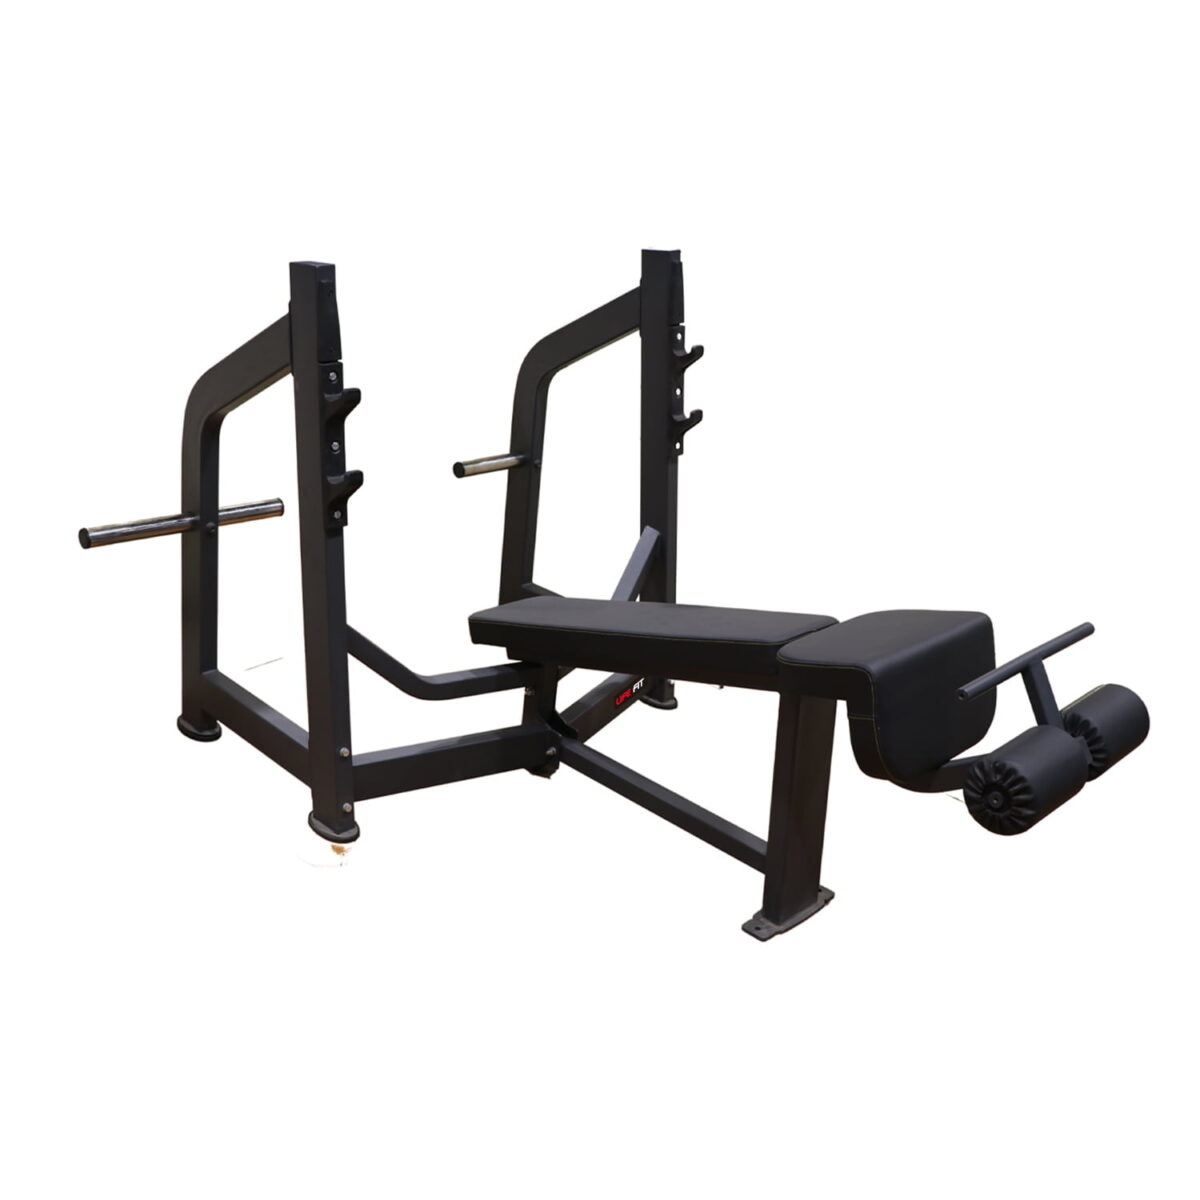 he Olympic Decline Weight Bench by Life fit India is a black squat bench with a bar, perfect for weightlifting and strength training.